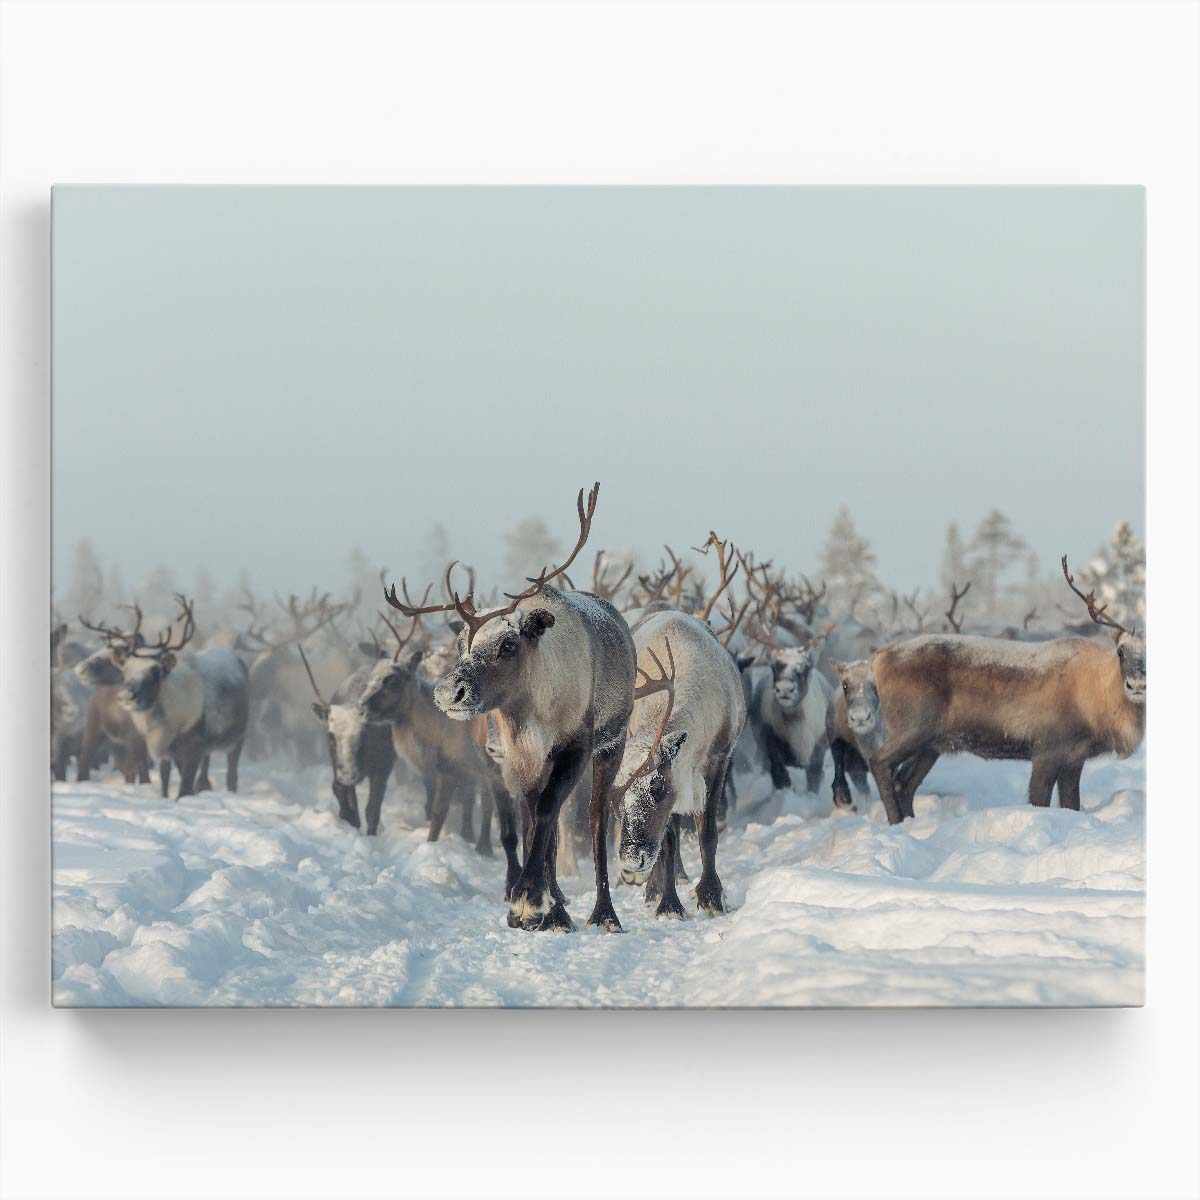 Frosty Winter Reindeer Herd Snowscape Wall Art by Luxuriance Designs. Made in USA.